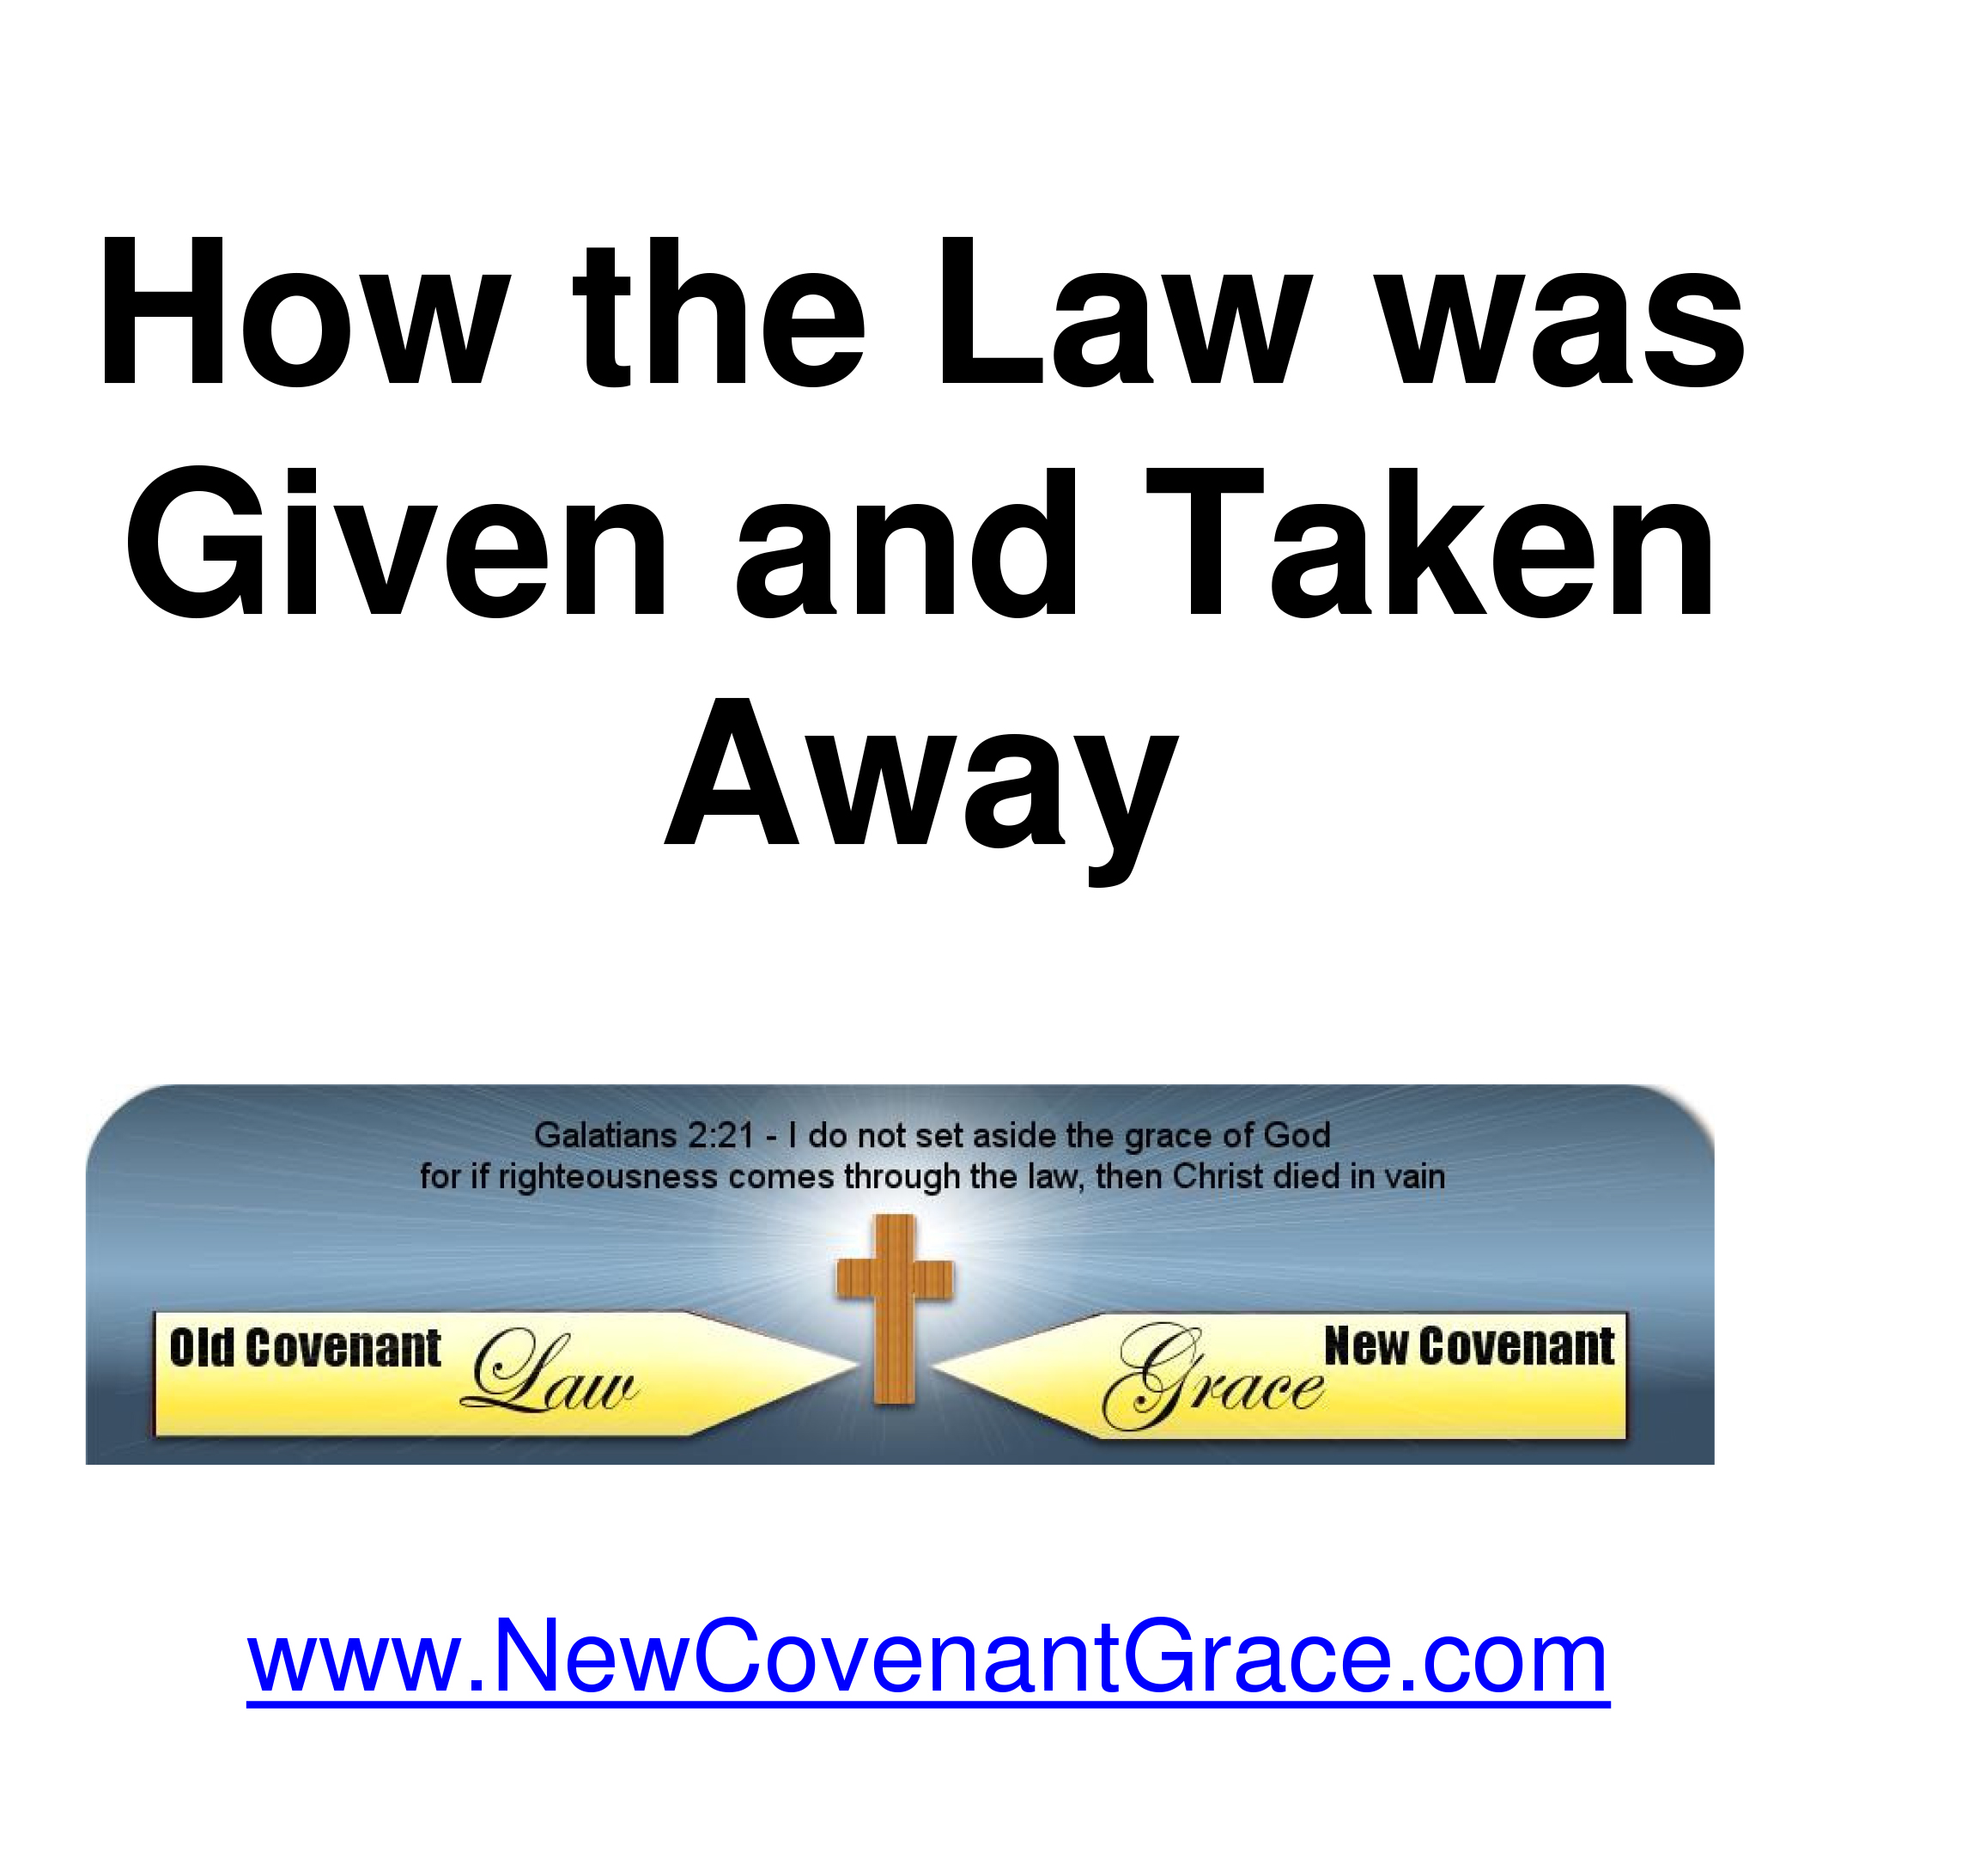 How the Law was Given and Taken Away (e-book)